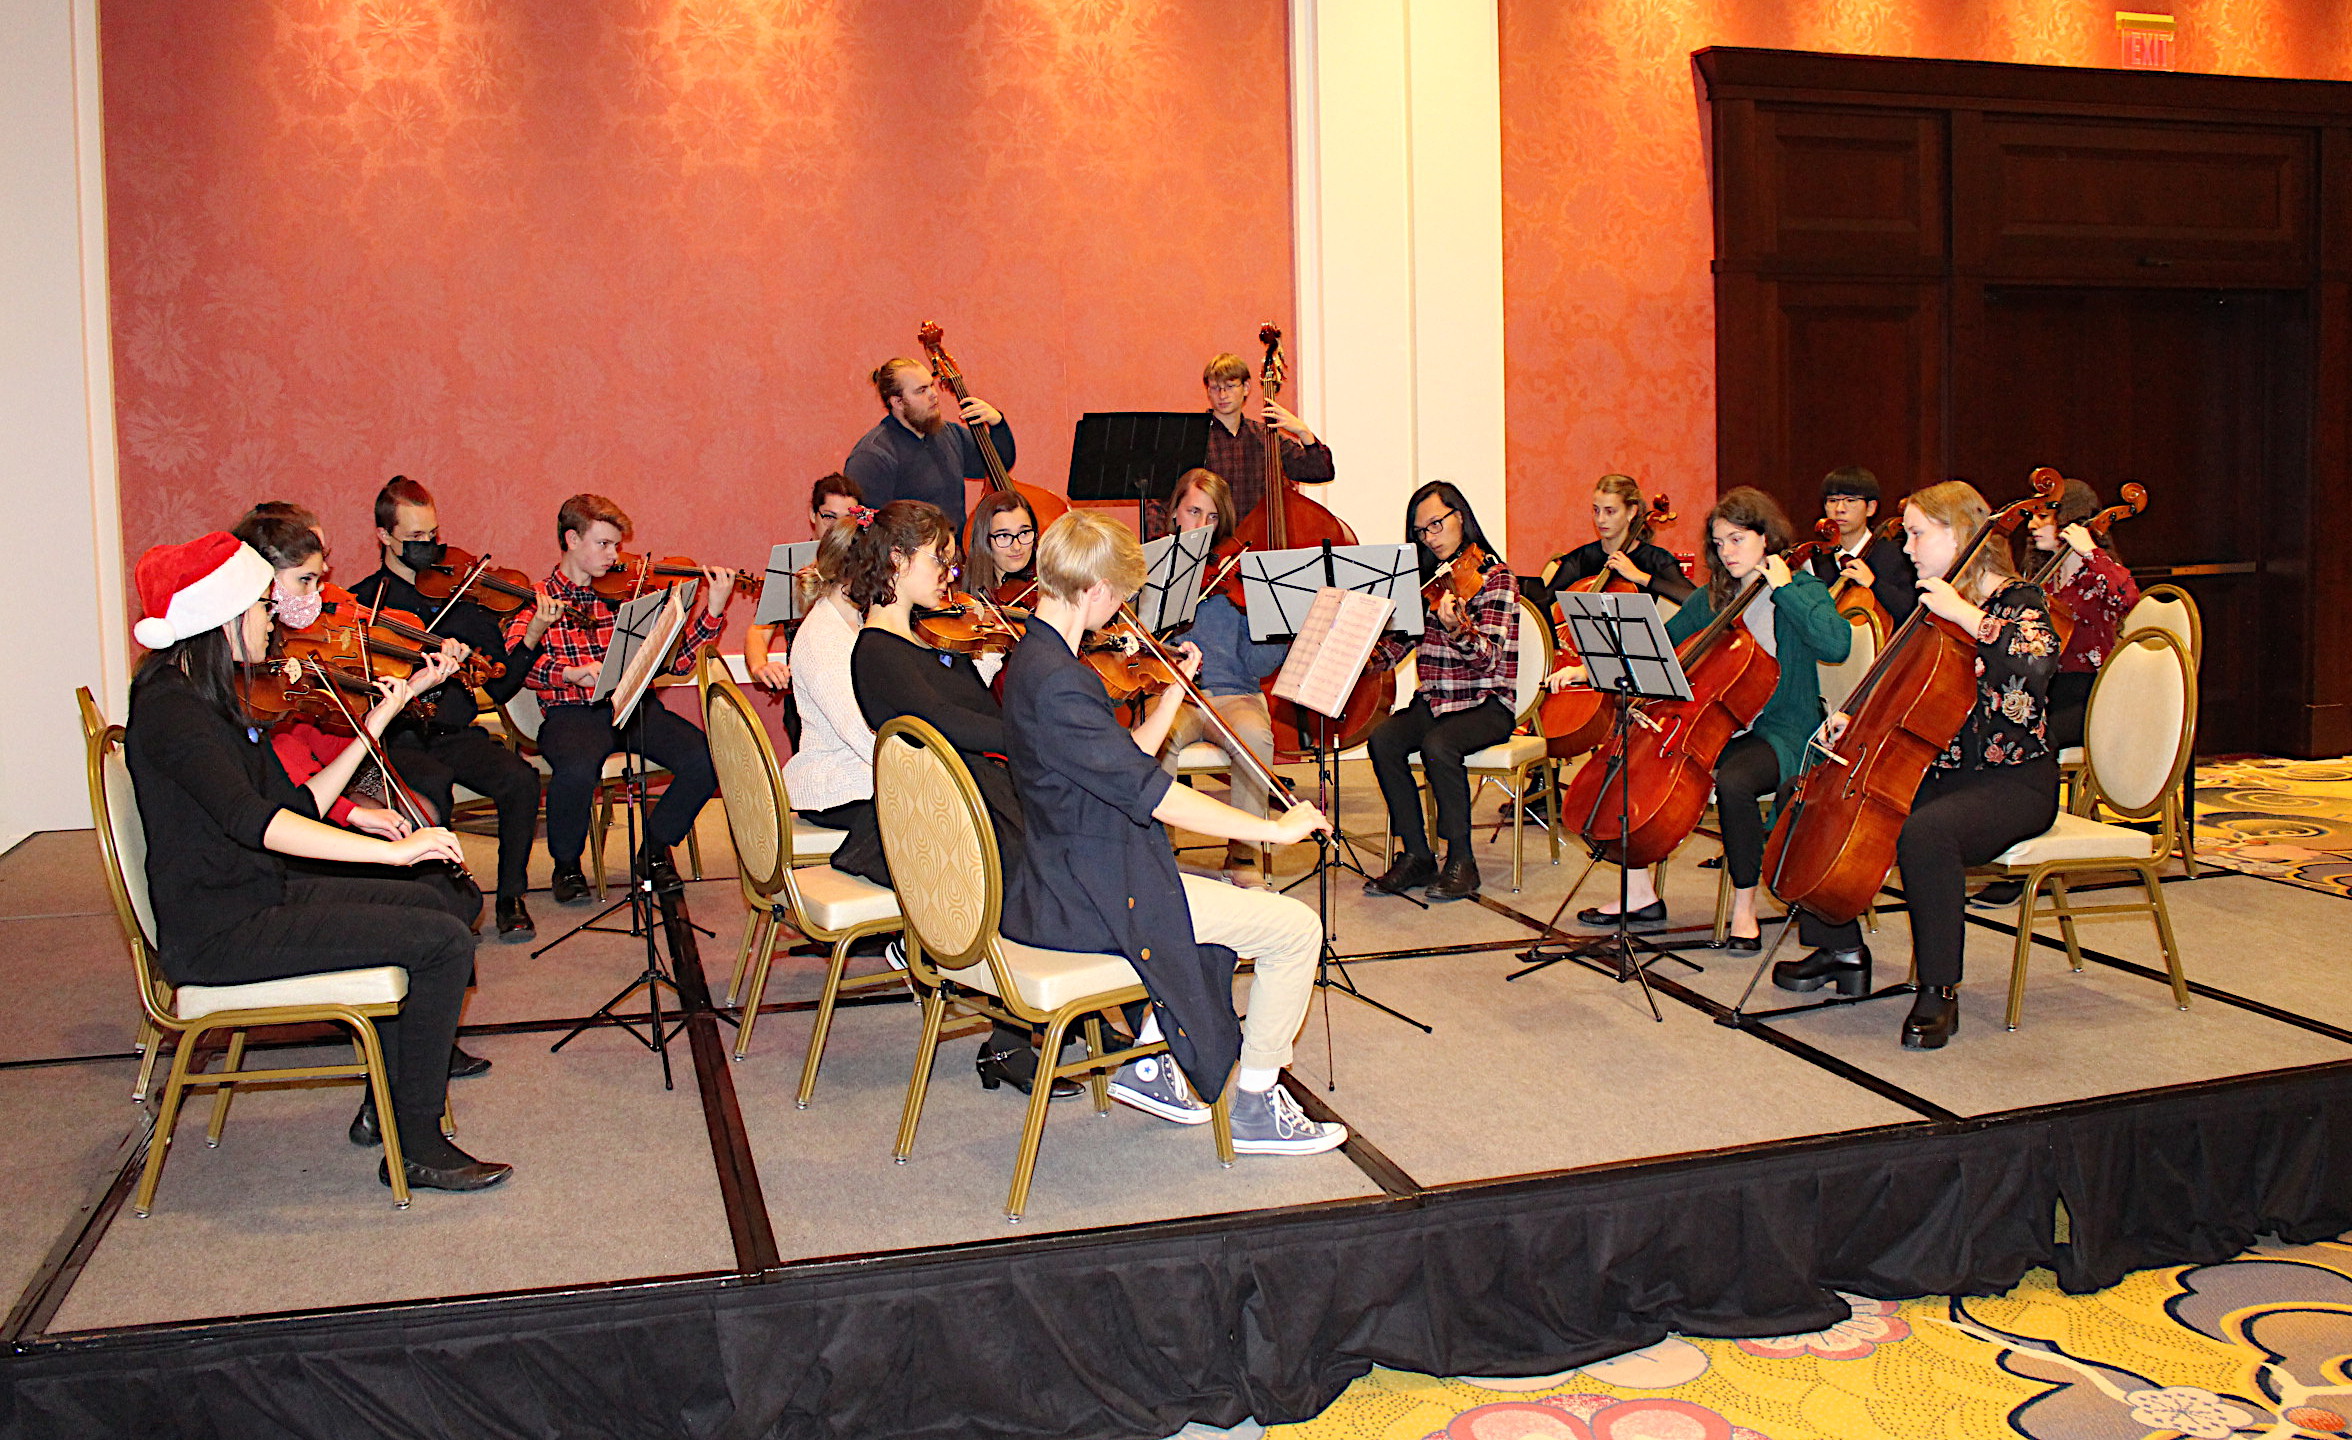 Music was provided by the Jenison High School Orchestra.